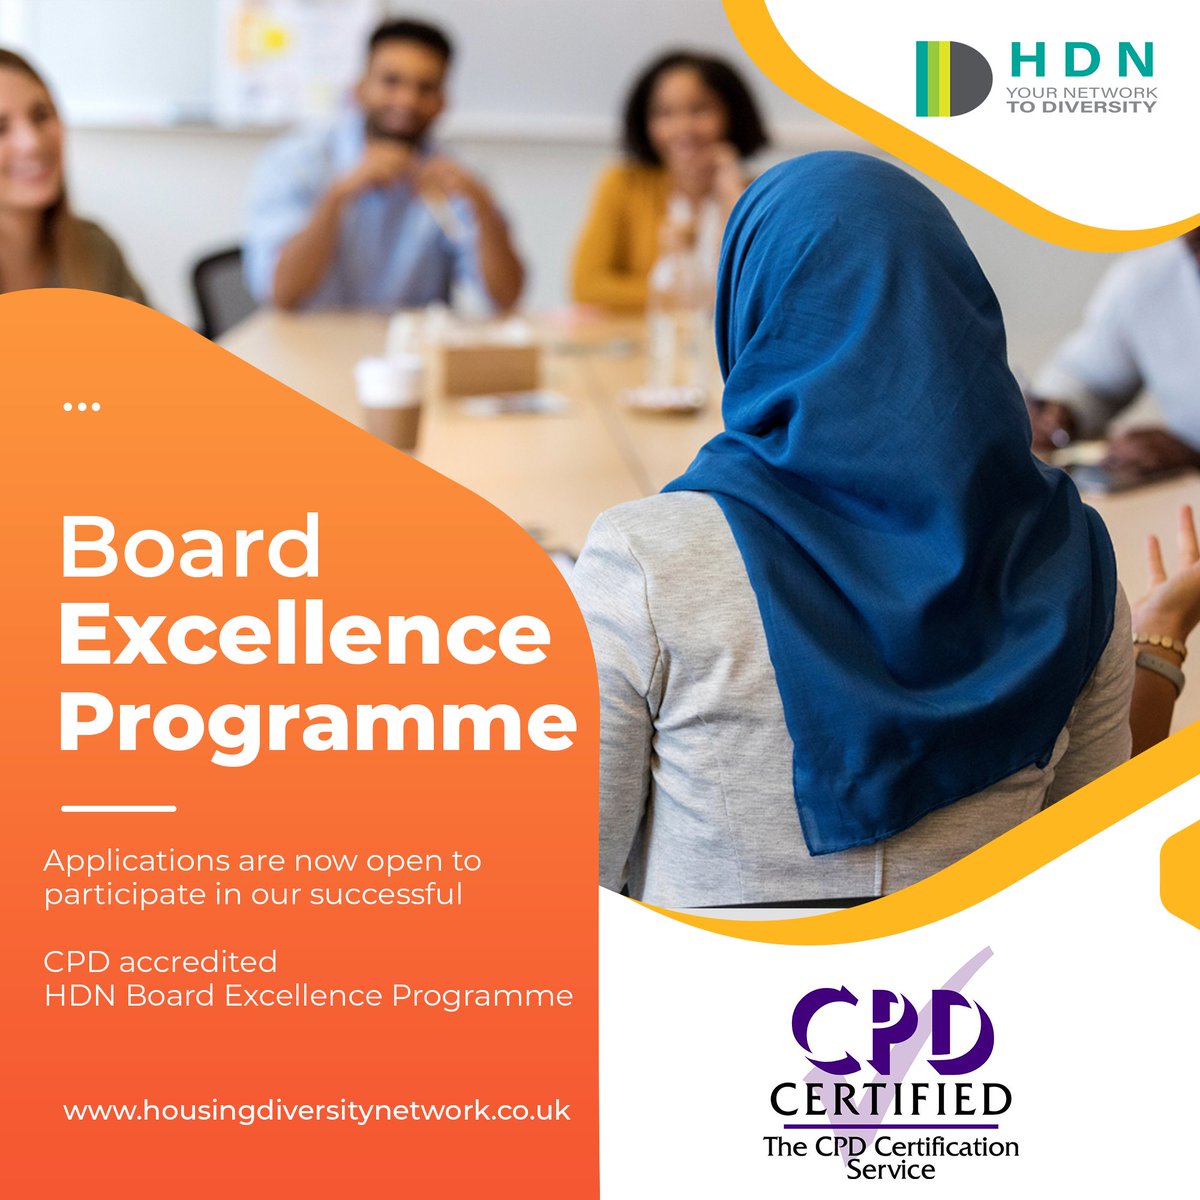 Applications are now open 👏 to participate in our successful #cpdaccredited #HDN #BoardExcellenceProgramme.👨🏽‍🎓
Places are excellent value for both members and non-members of HDN. Click below 👇 for further details and how to apply.
bit.ly/3dRV7FH
#housingdiversitynetwork